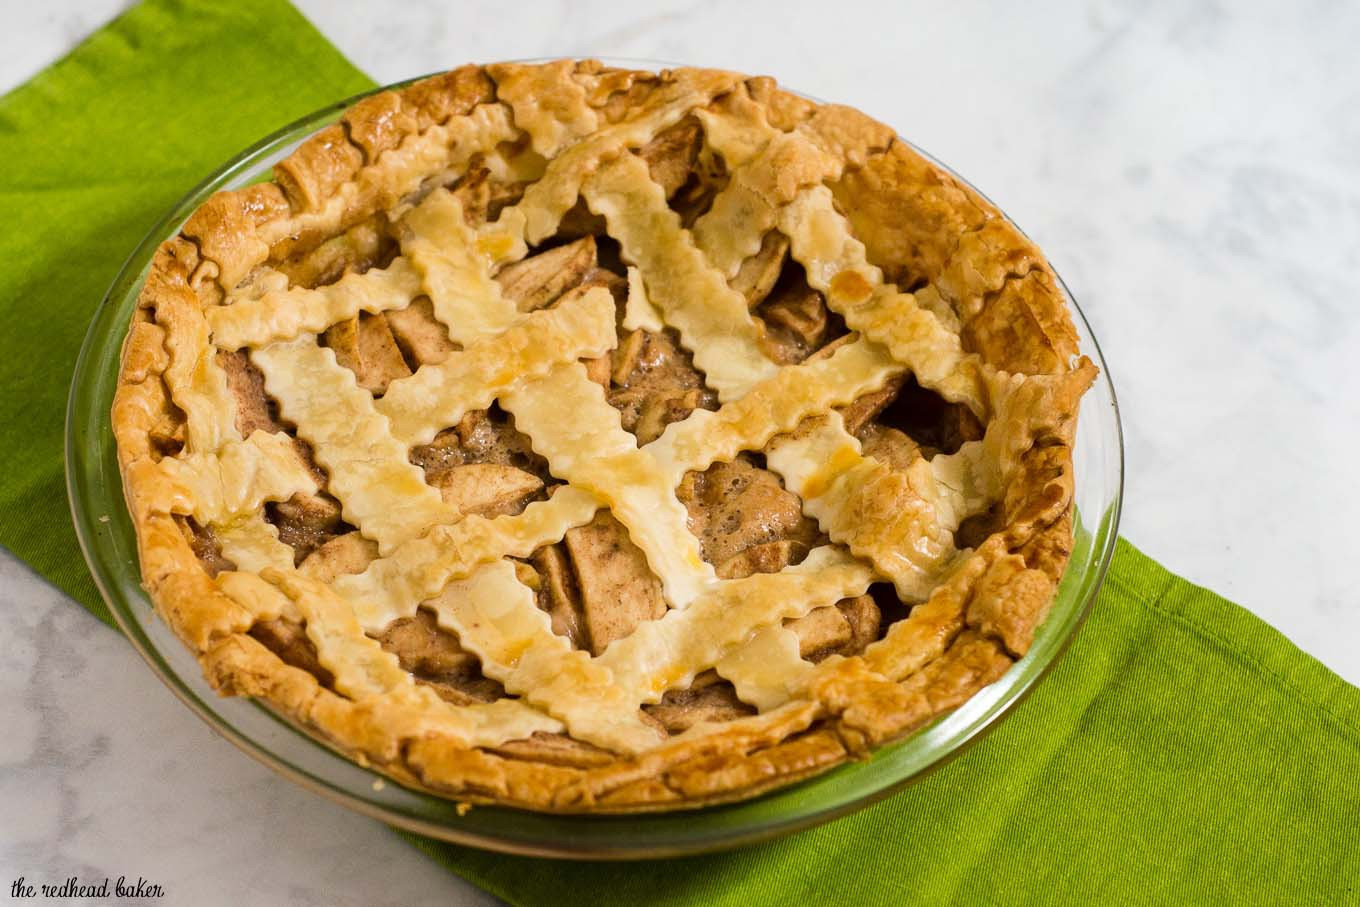 Apple Pie Cook Time
 21 Ideas for Apple Pie Bake Time Best Round Up Recipe